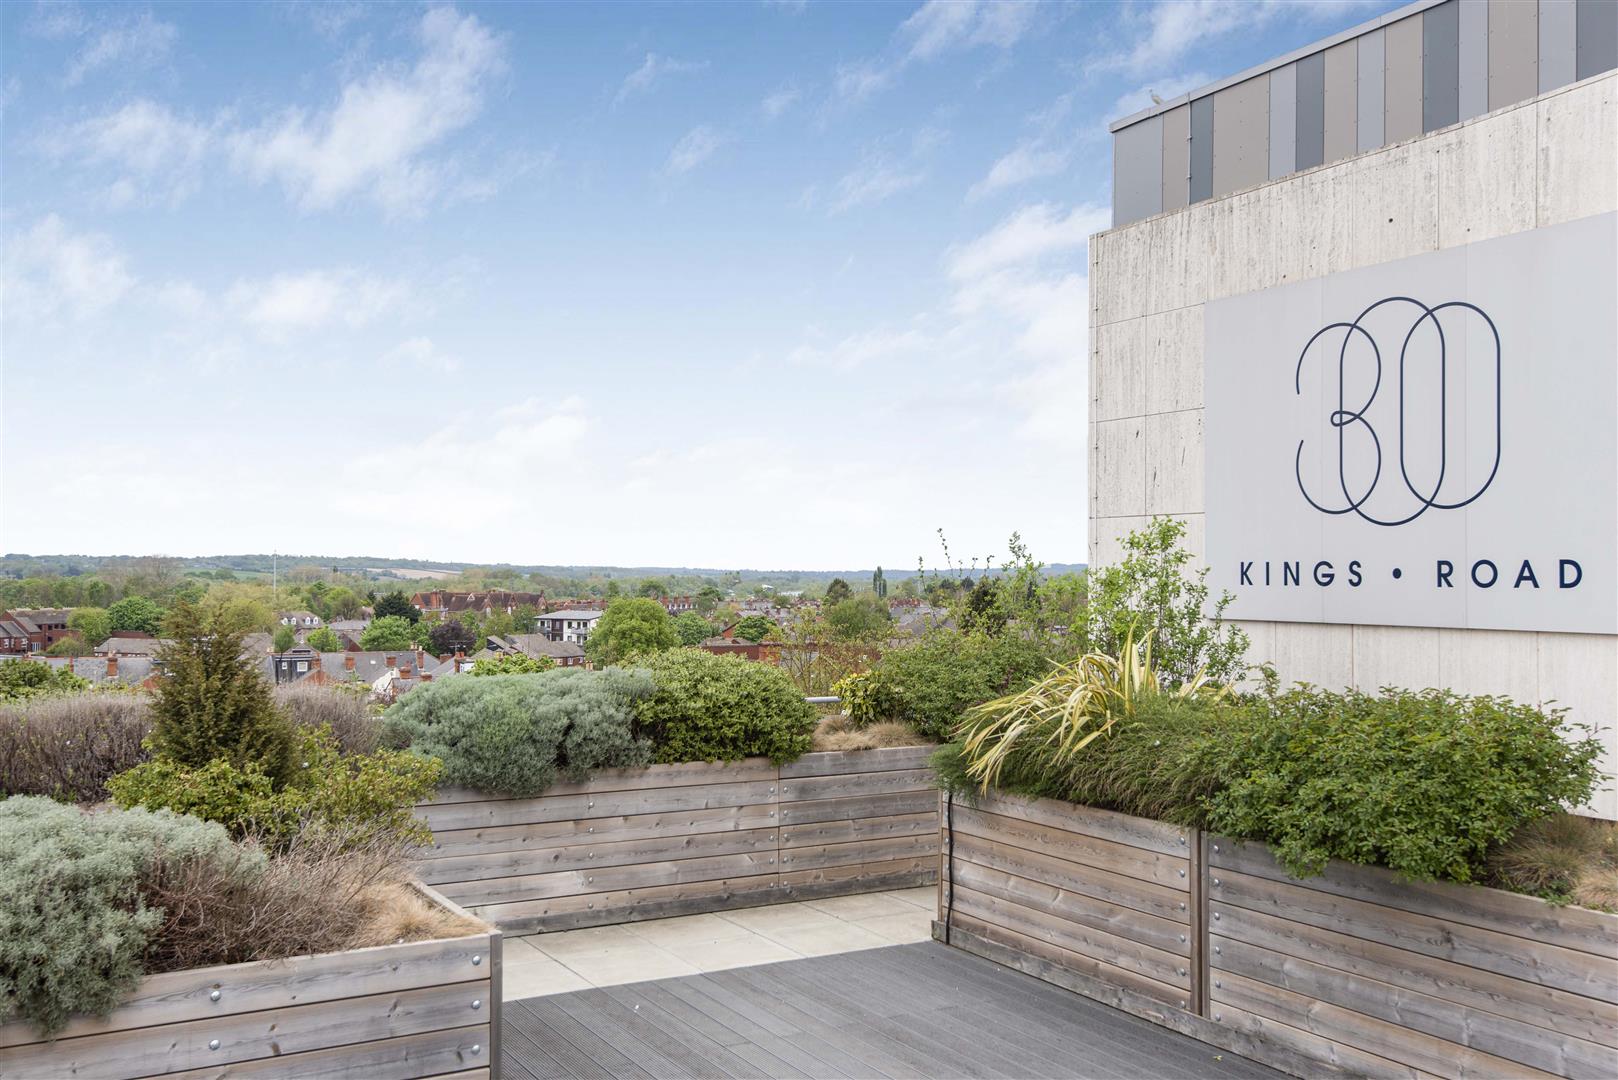 300 Kings Road  house for sale in Reading